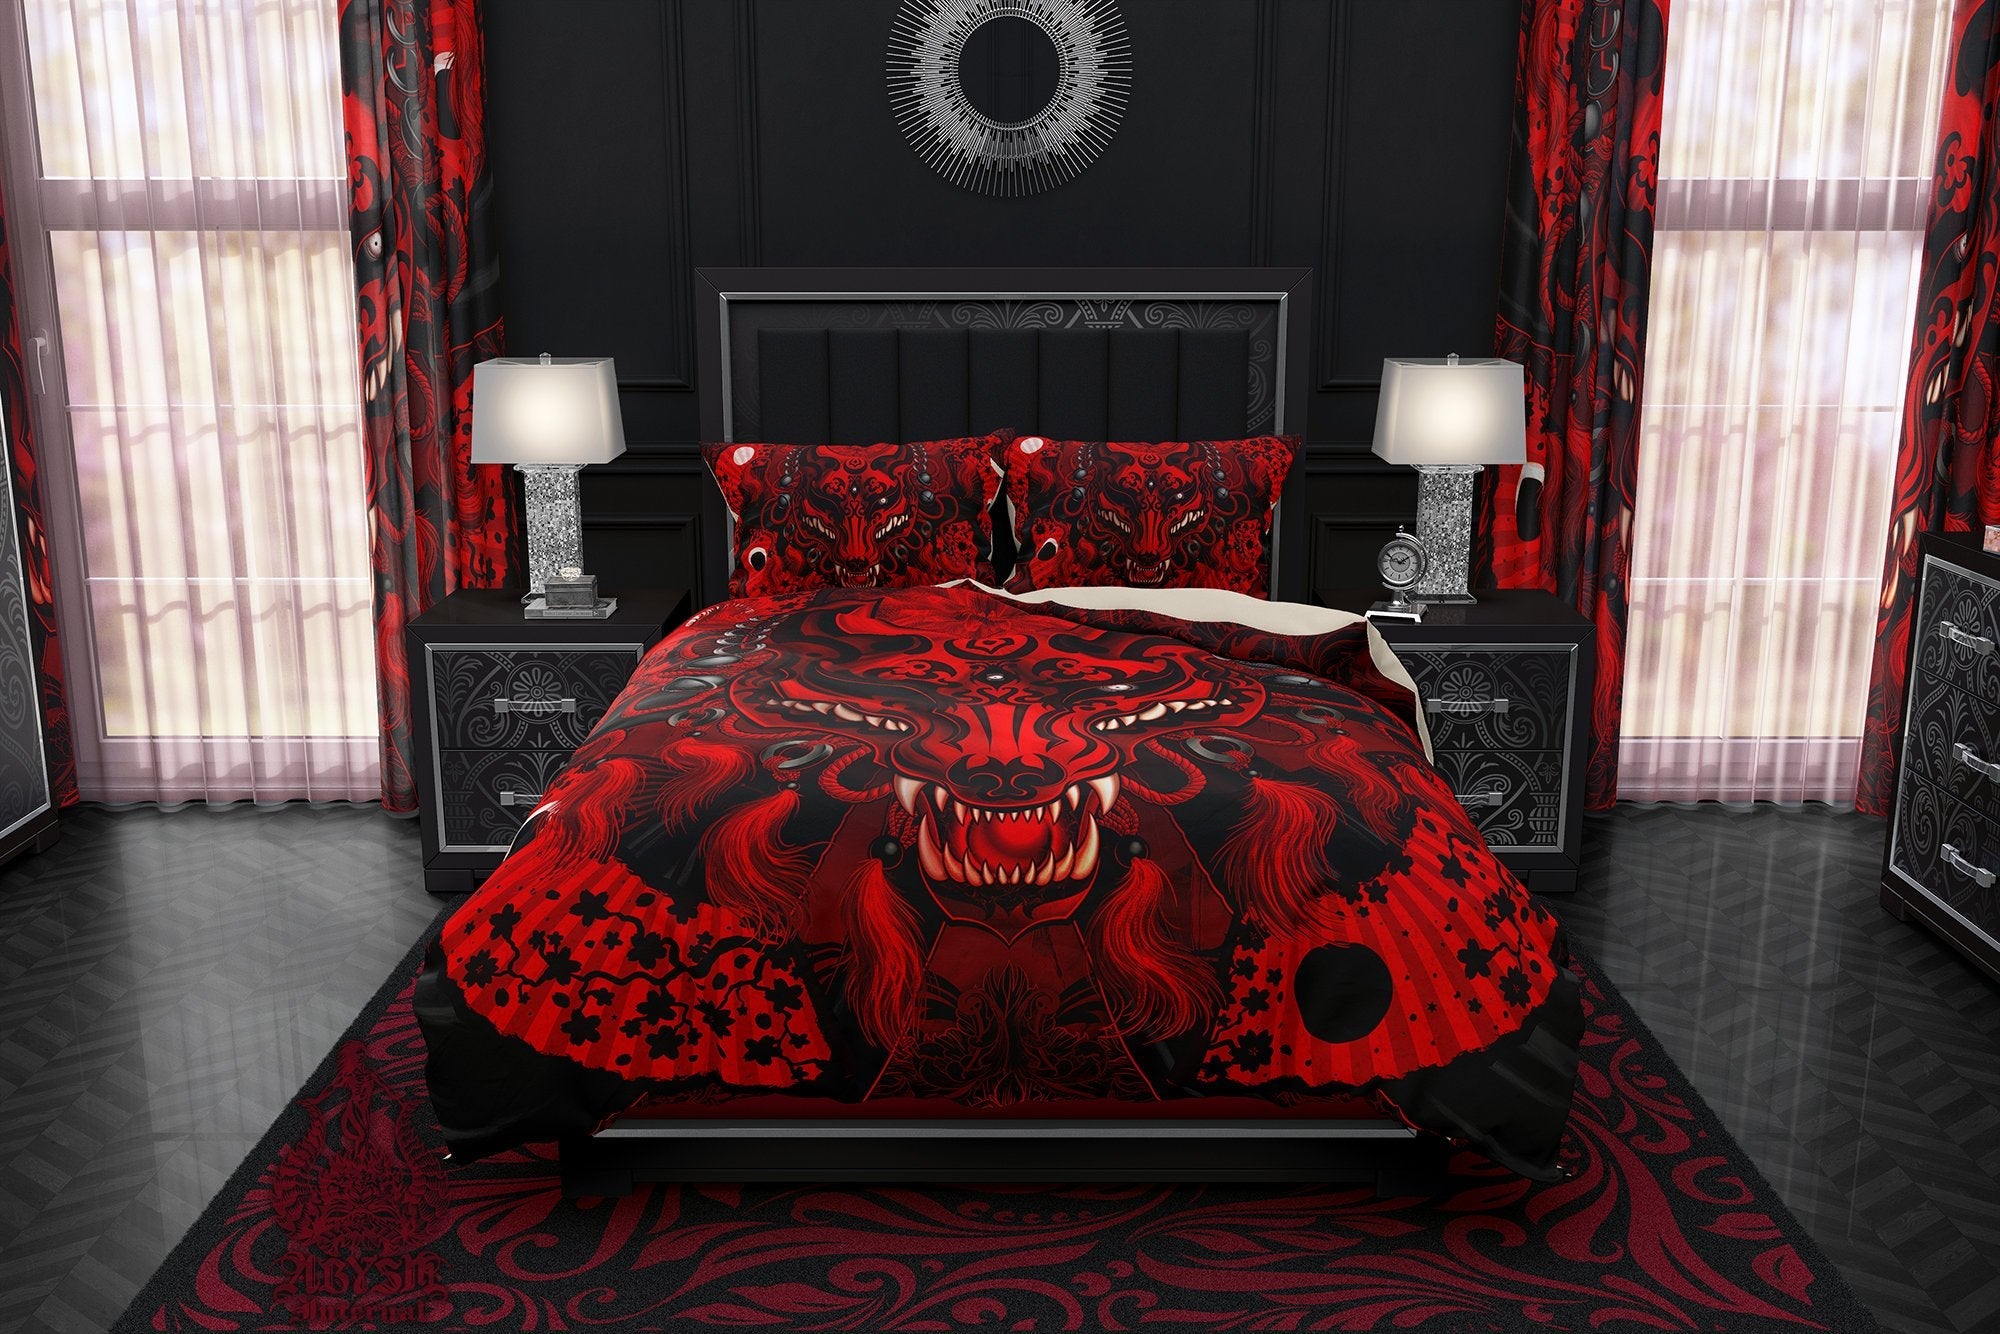 Kitsune Mask Bedding Set, Comforter and Duvet, Gamer Bed Cover and Bedroom Decor, Fox Okami, Anime Art, King, Queen and Twin Size - Bloody Black Gothic - Abysm Internal